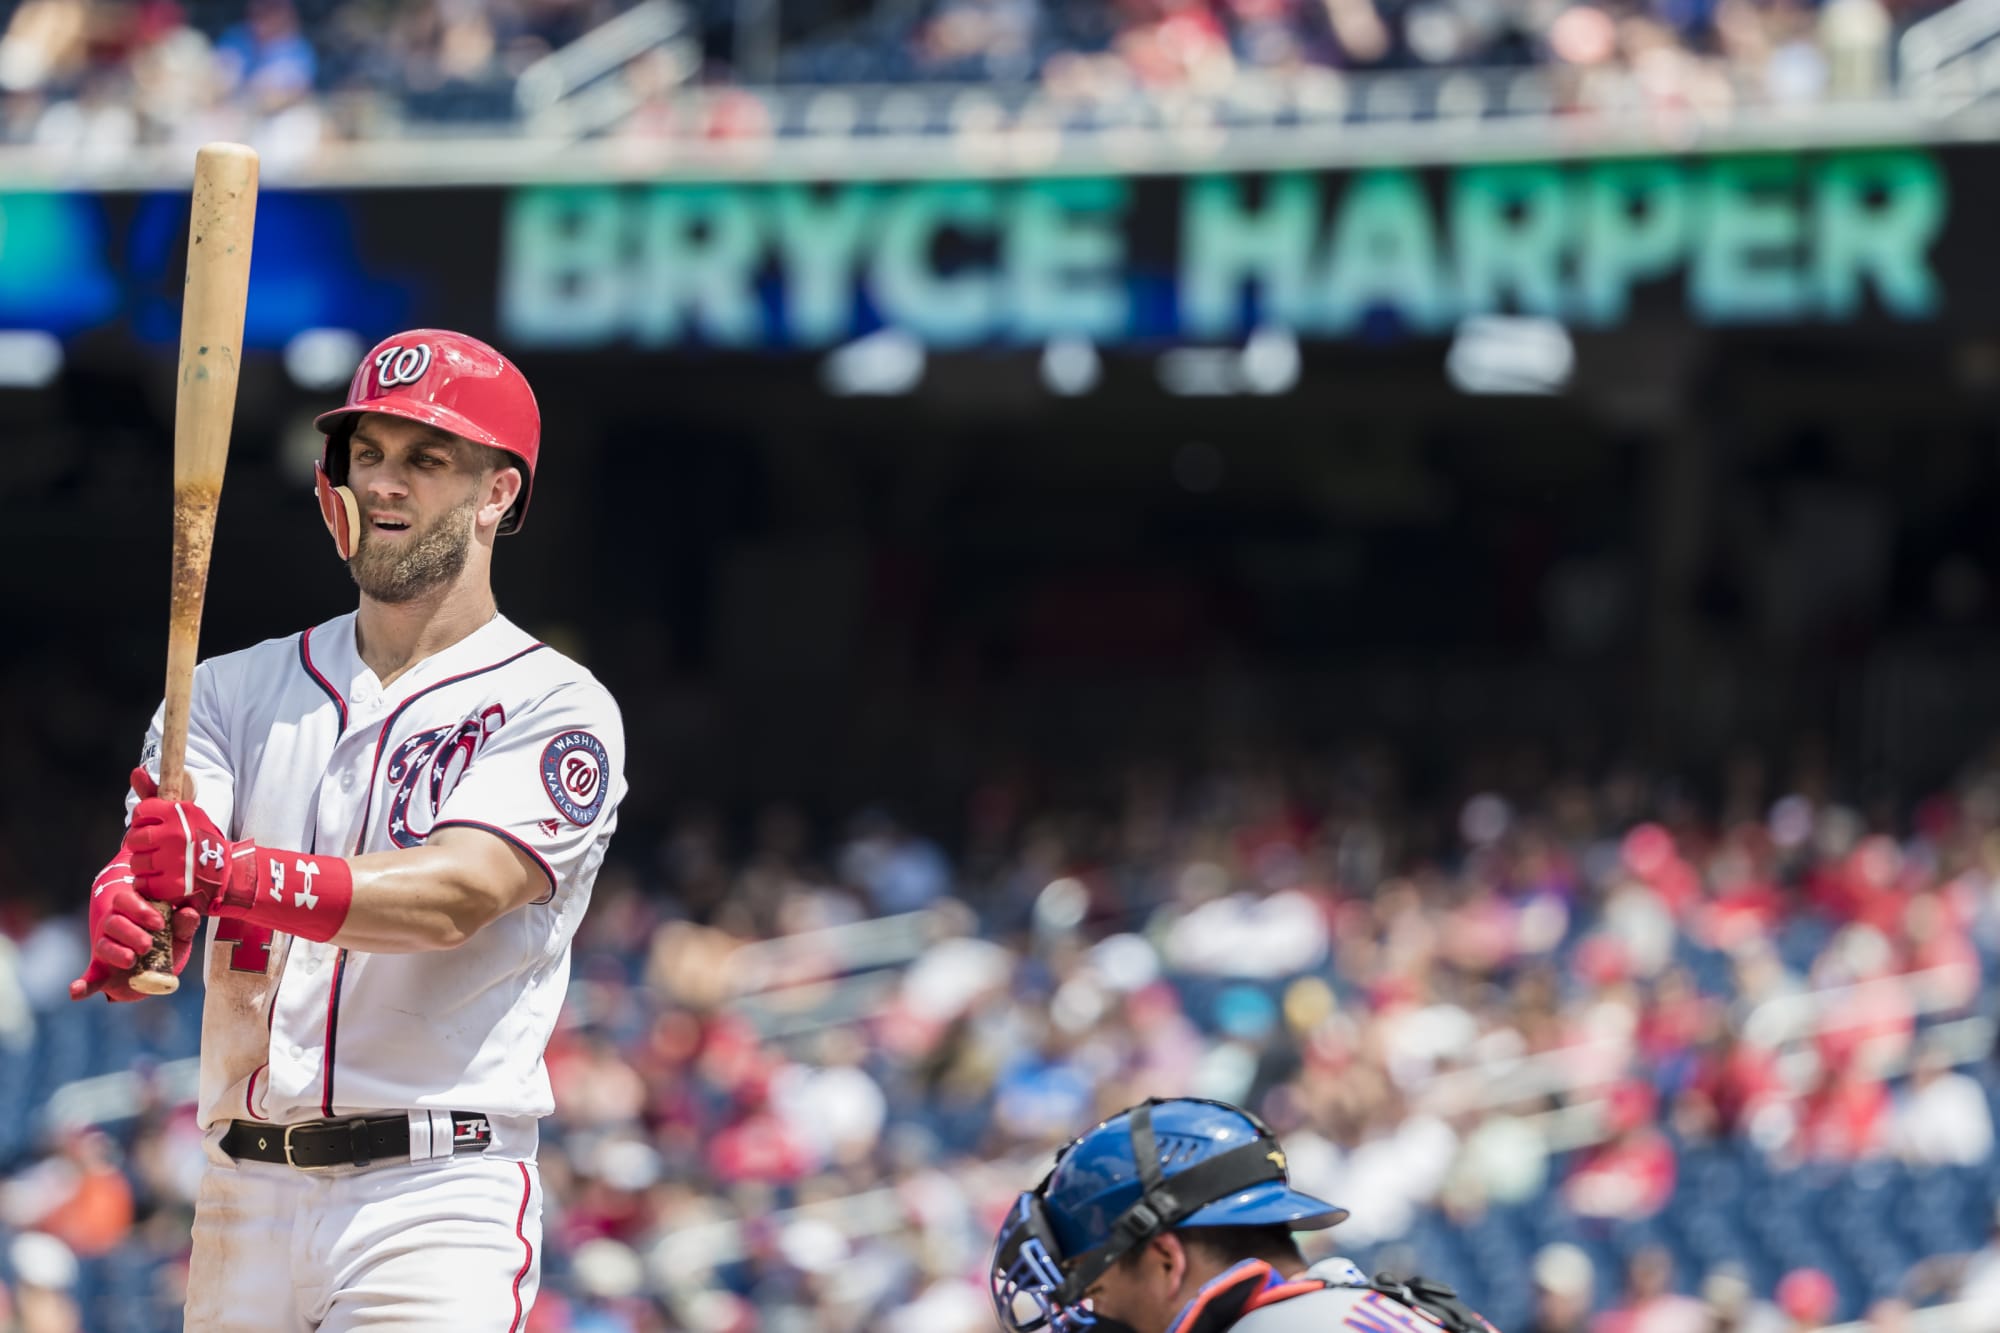 St. Louis Cardinals: Which team should fans want Harper to sign with?